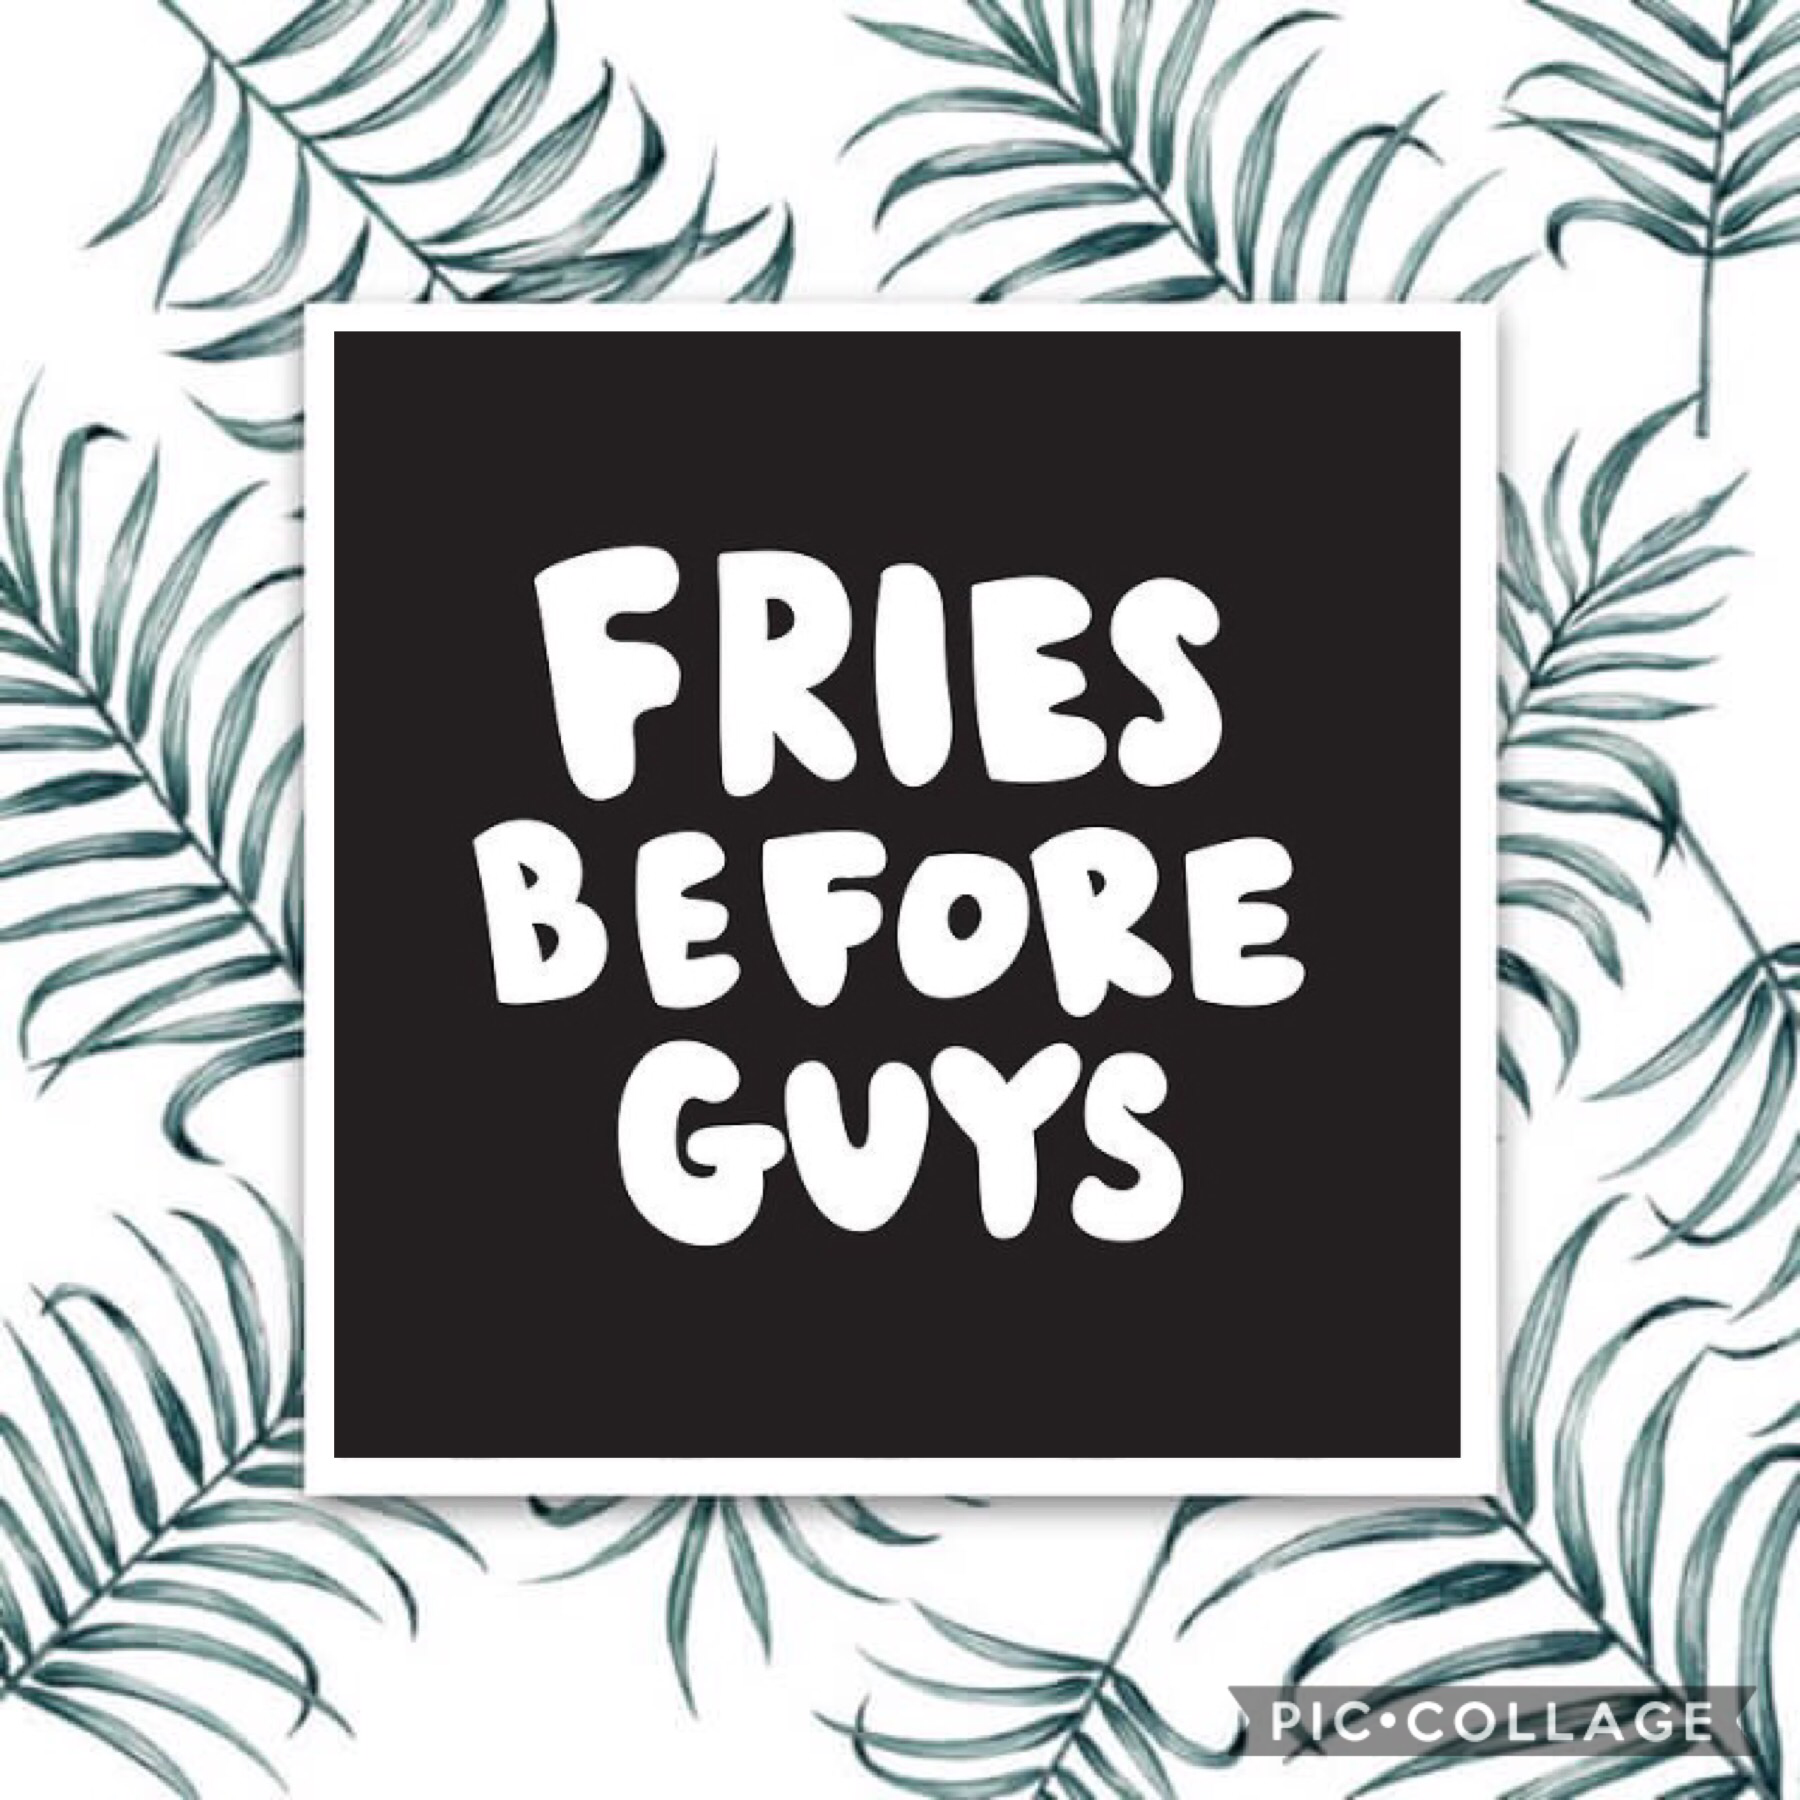 Sorry to all the guys out there but no! Fries before guys!!😍😍😋😋😬